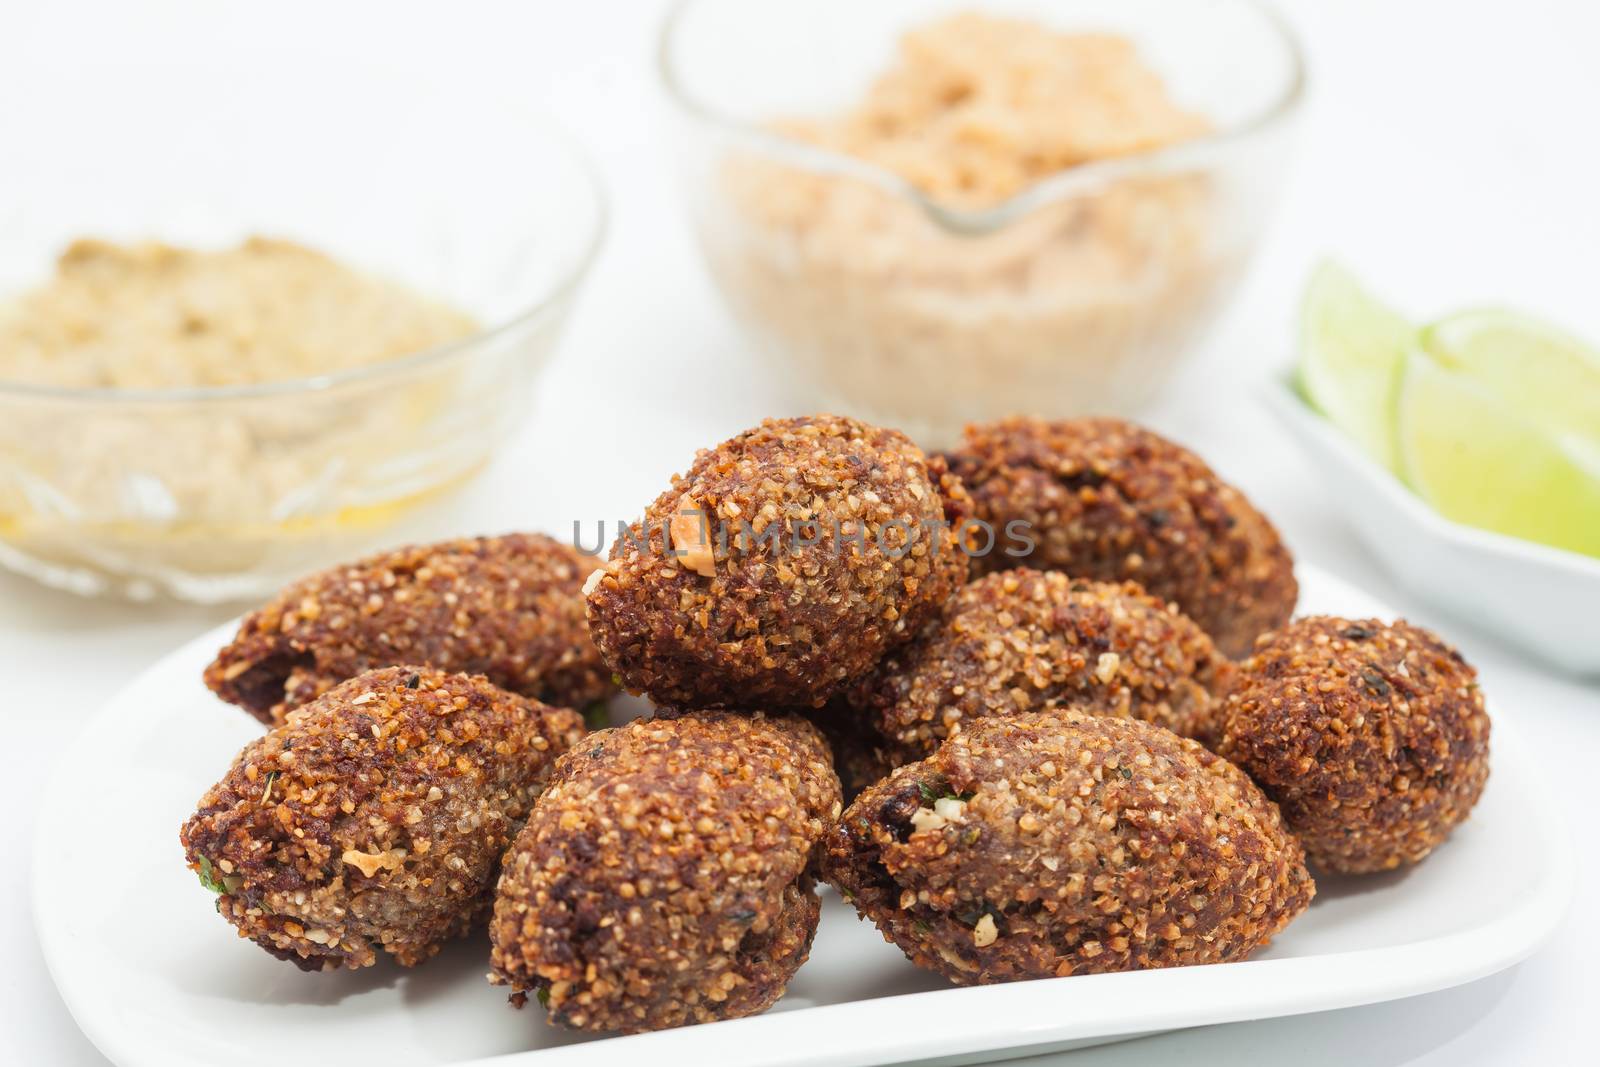 Step by step Levantine cuisine kibbeh preparation : Ready fried kibbeh served with tahini and hummus